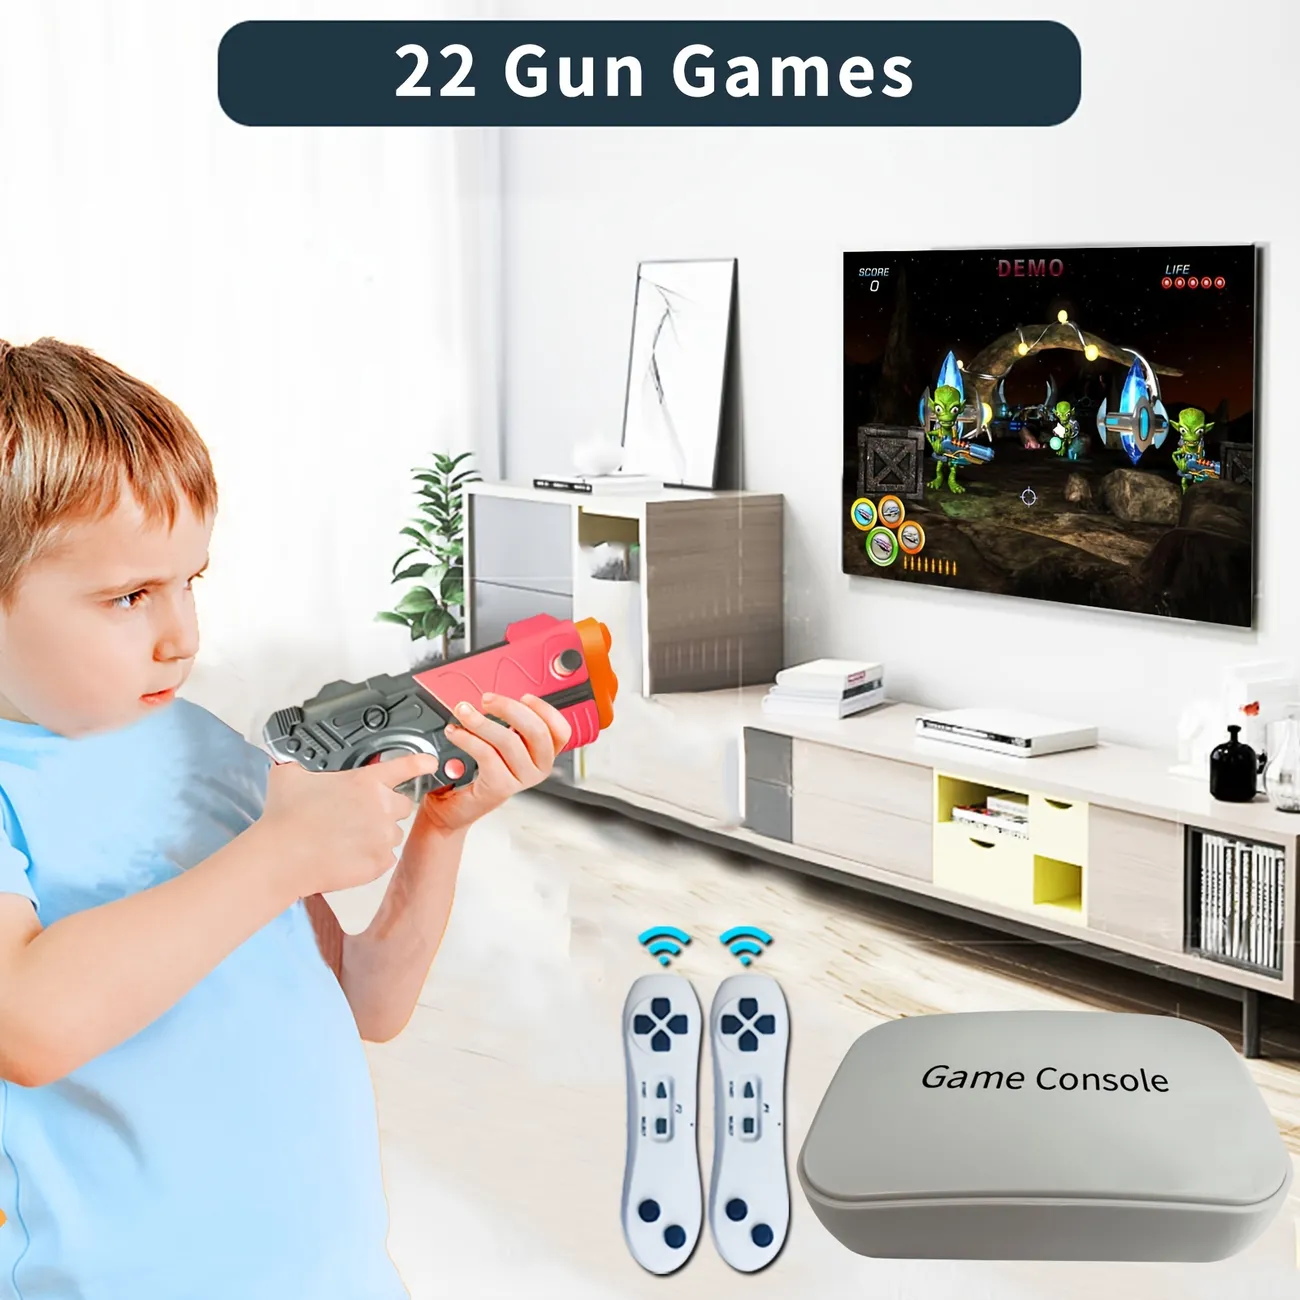 Game Console With 900+ Games, Tv Retro Video Game Console For Kids and Adults, Game Box With Ar Gun Games,2 Handheld Wireless Game Controllers, Plugand Play, Toy Gift For Boys And Girls